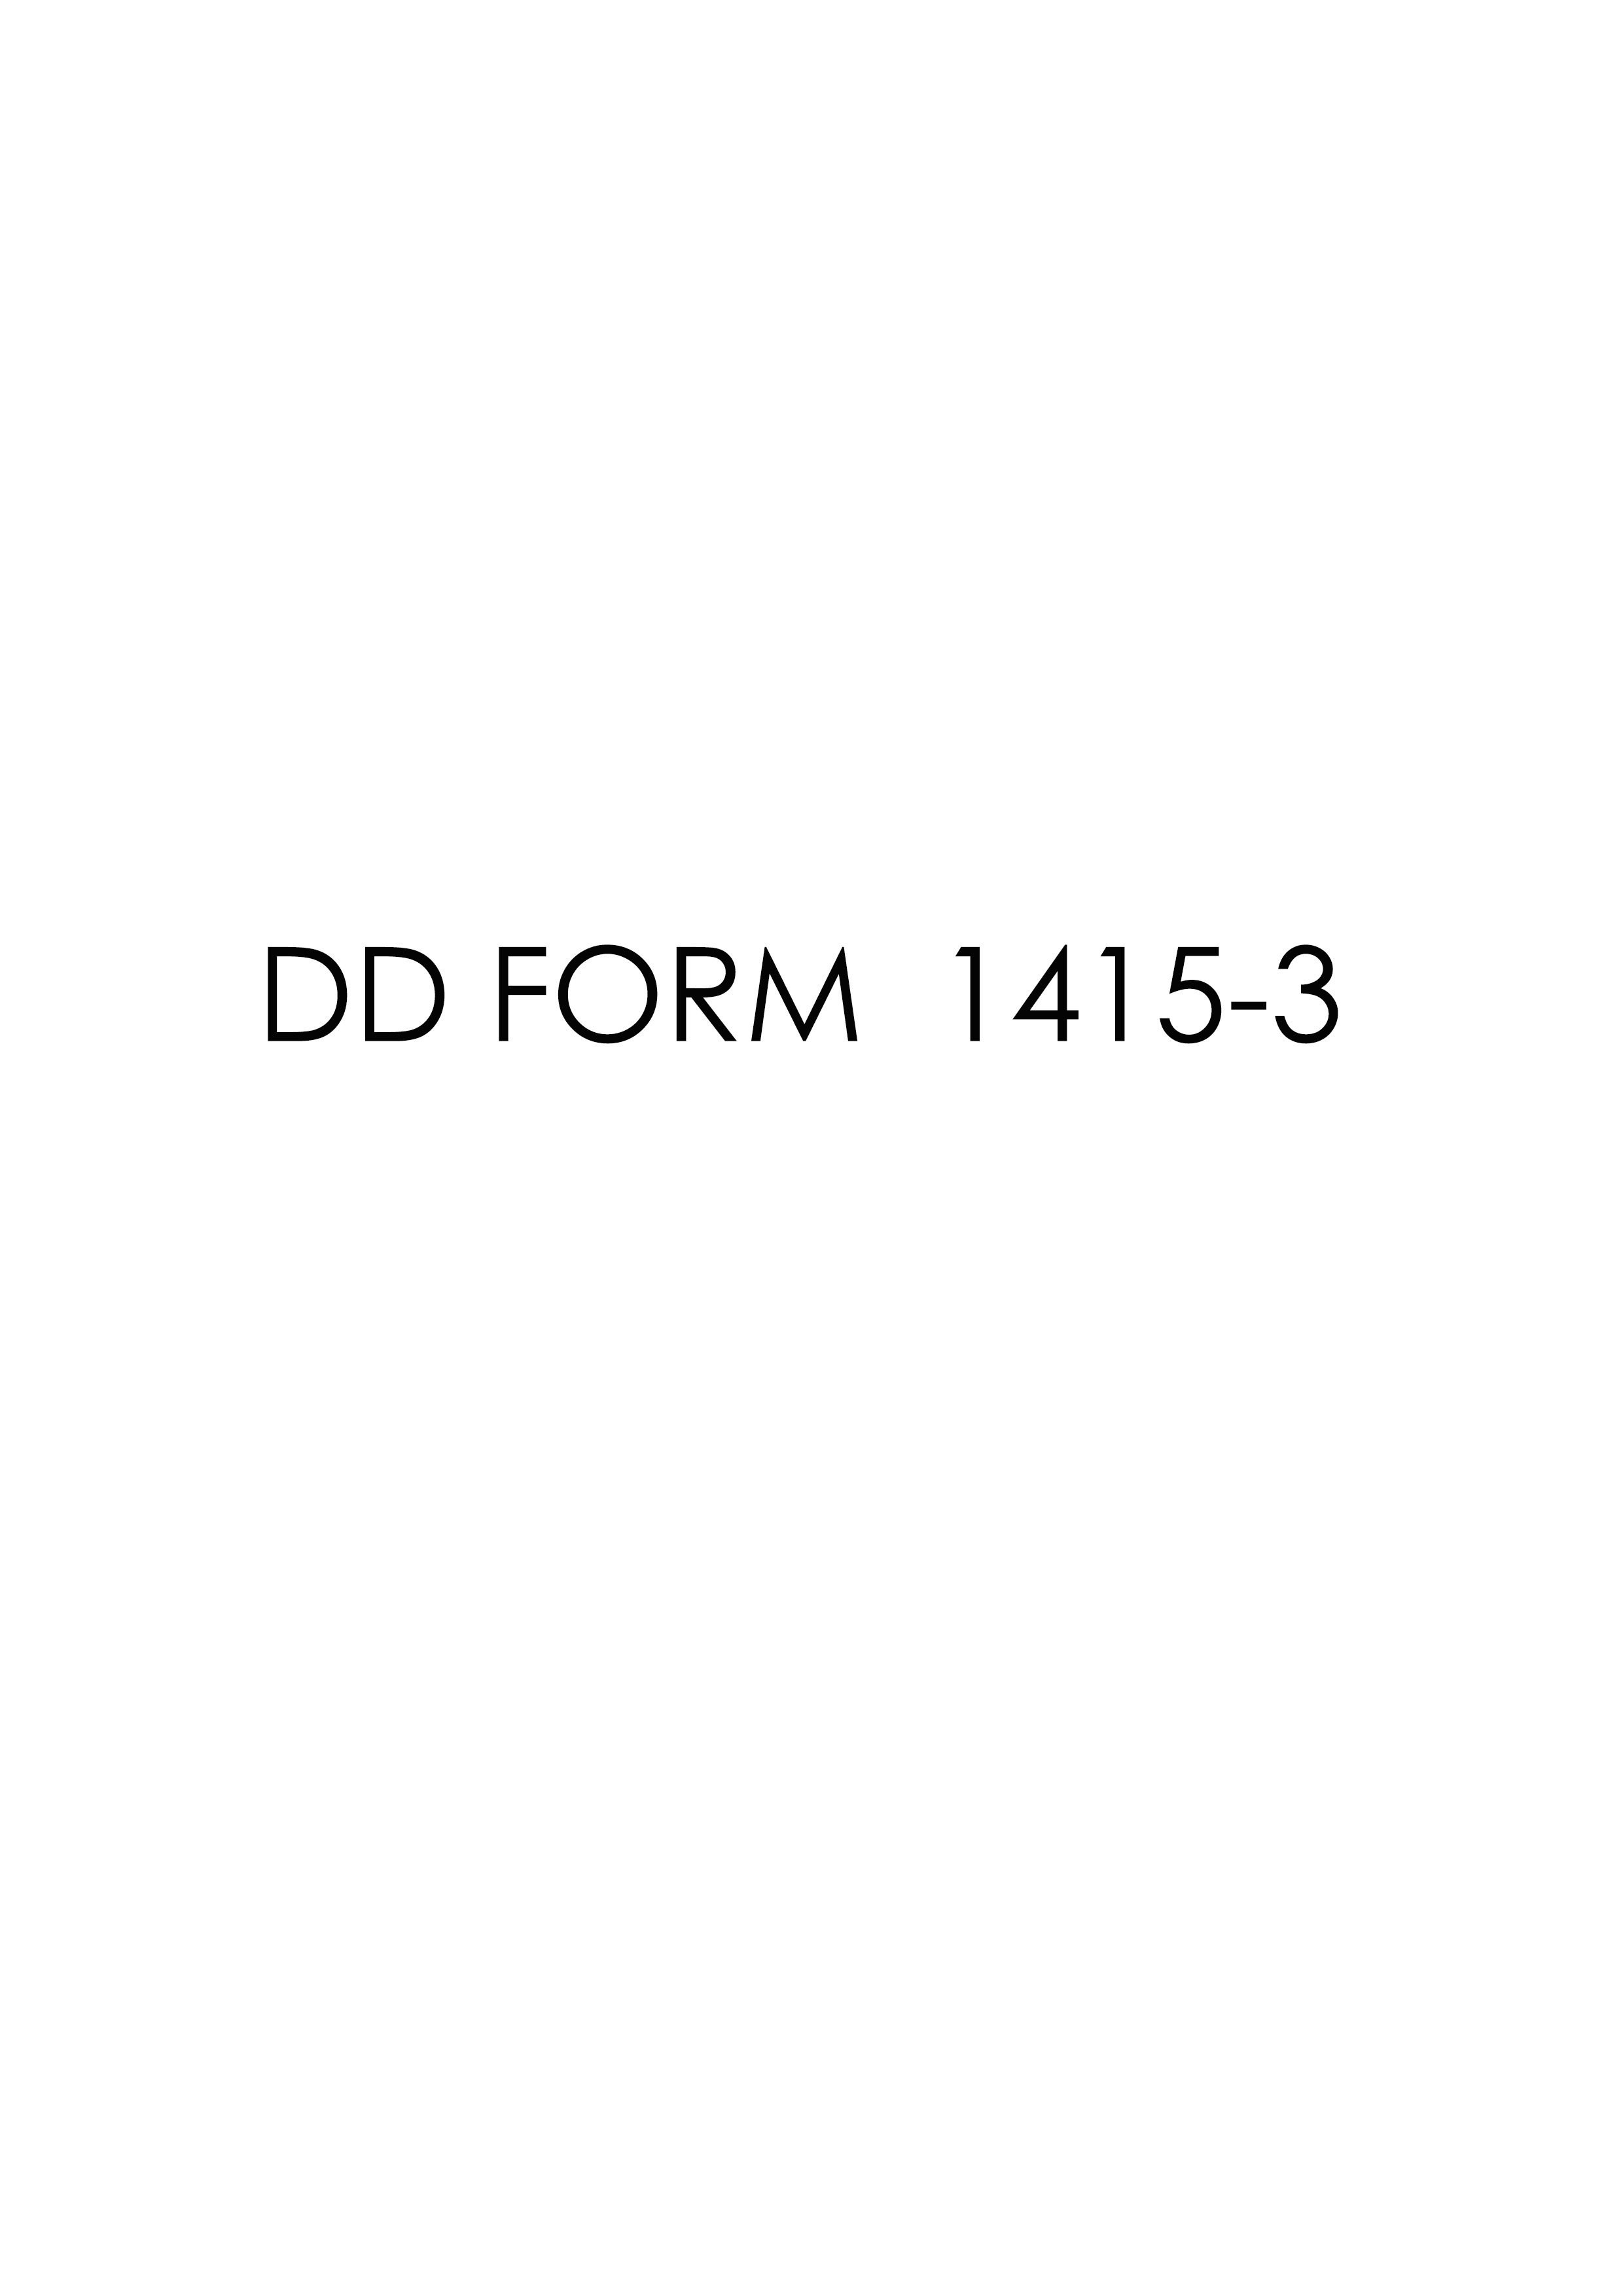 Download Fillable dd Form 1415-3